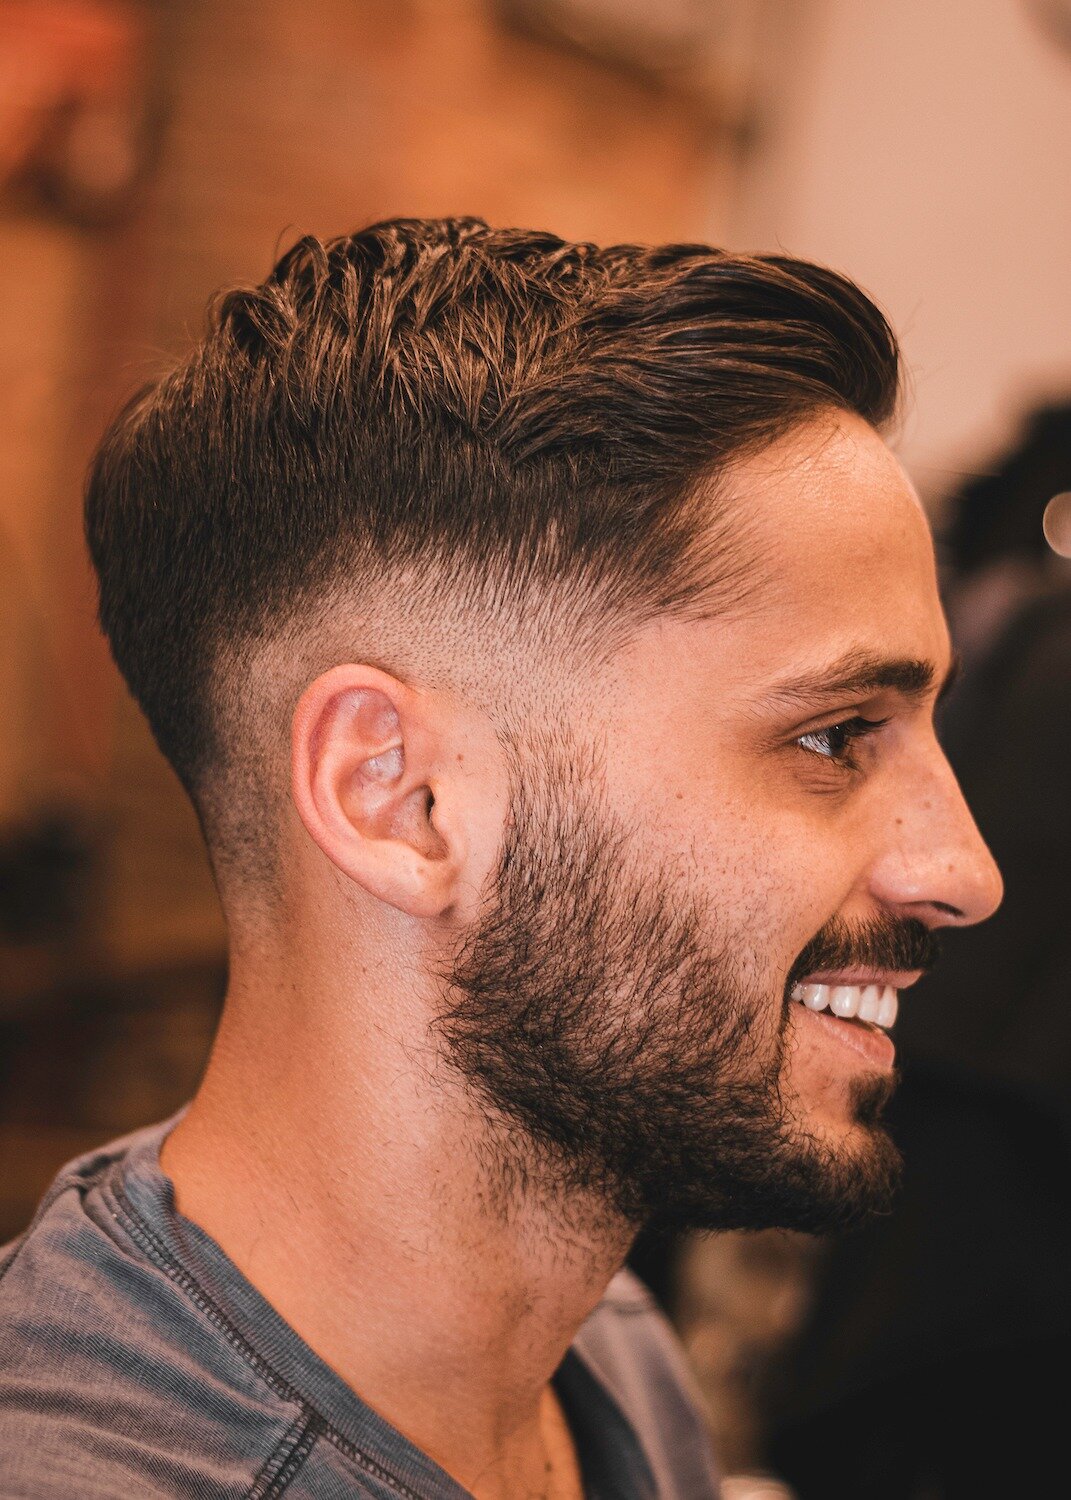 At Nic Grooming, it's all about the process.

Haircut by Marissa / @hairby.marissa 
Photos by @jameswood_photography 

#menshair #phillybarbershop #centercityphilly #getfadedphilly #rittenhousesquare